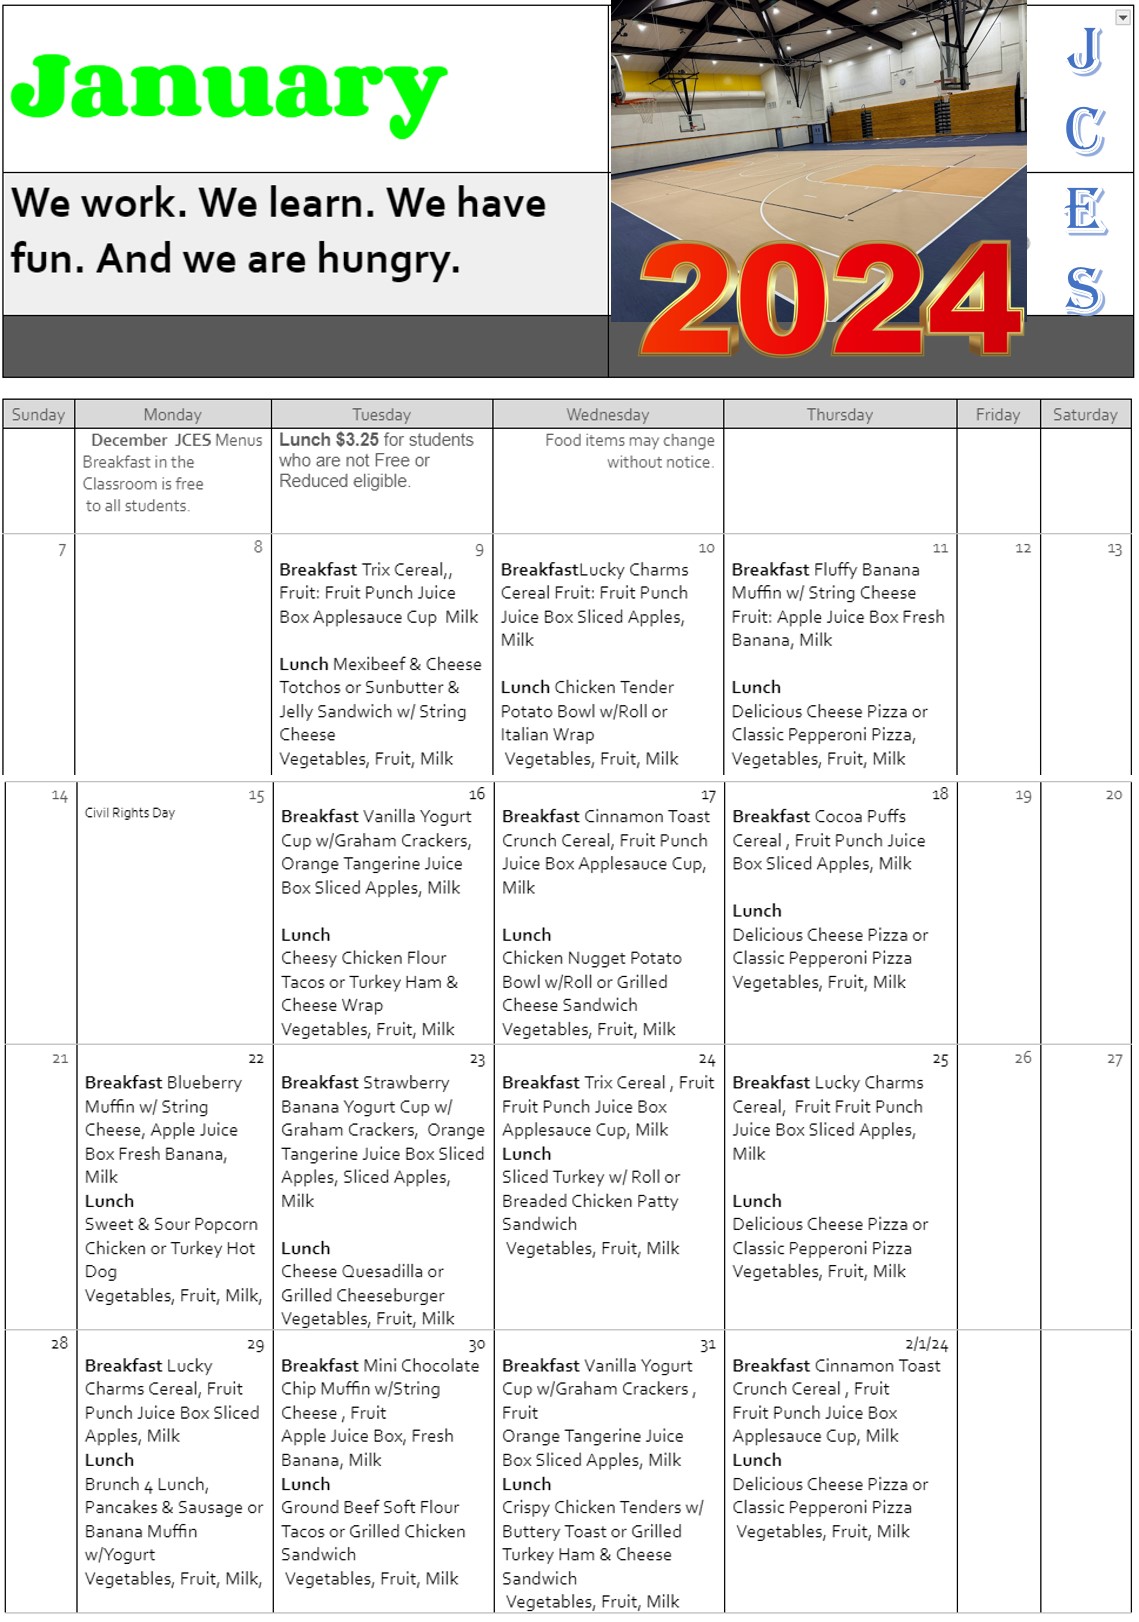 January 2024 Breakfast and Lunch menu at JCES